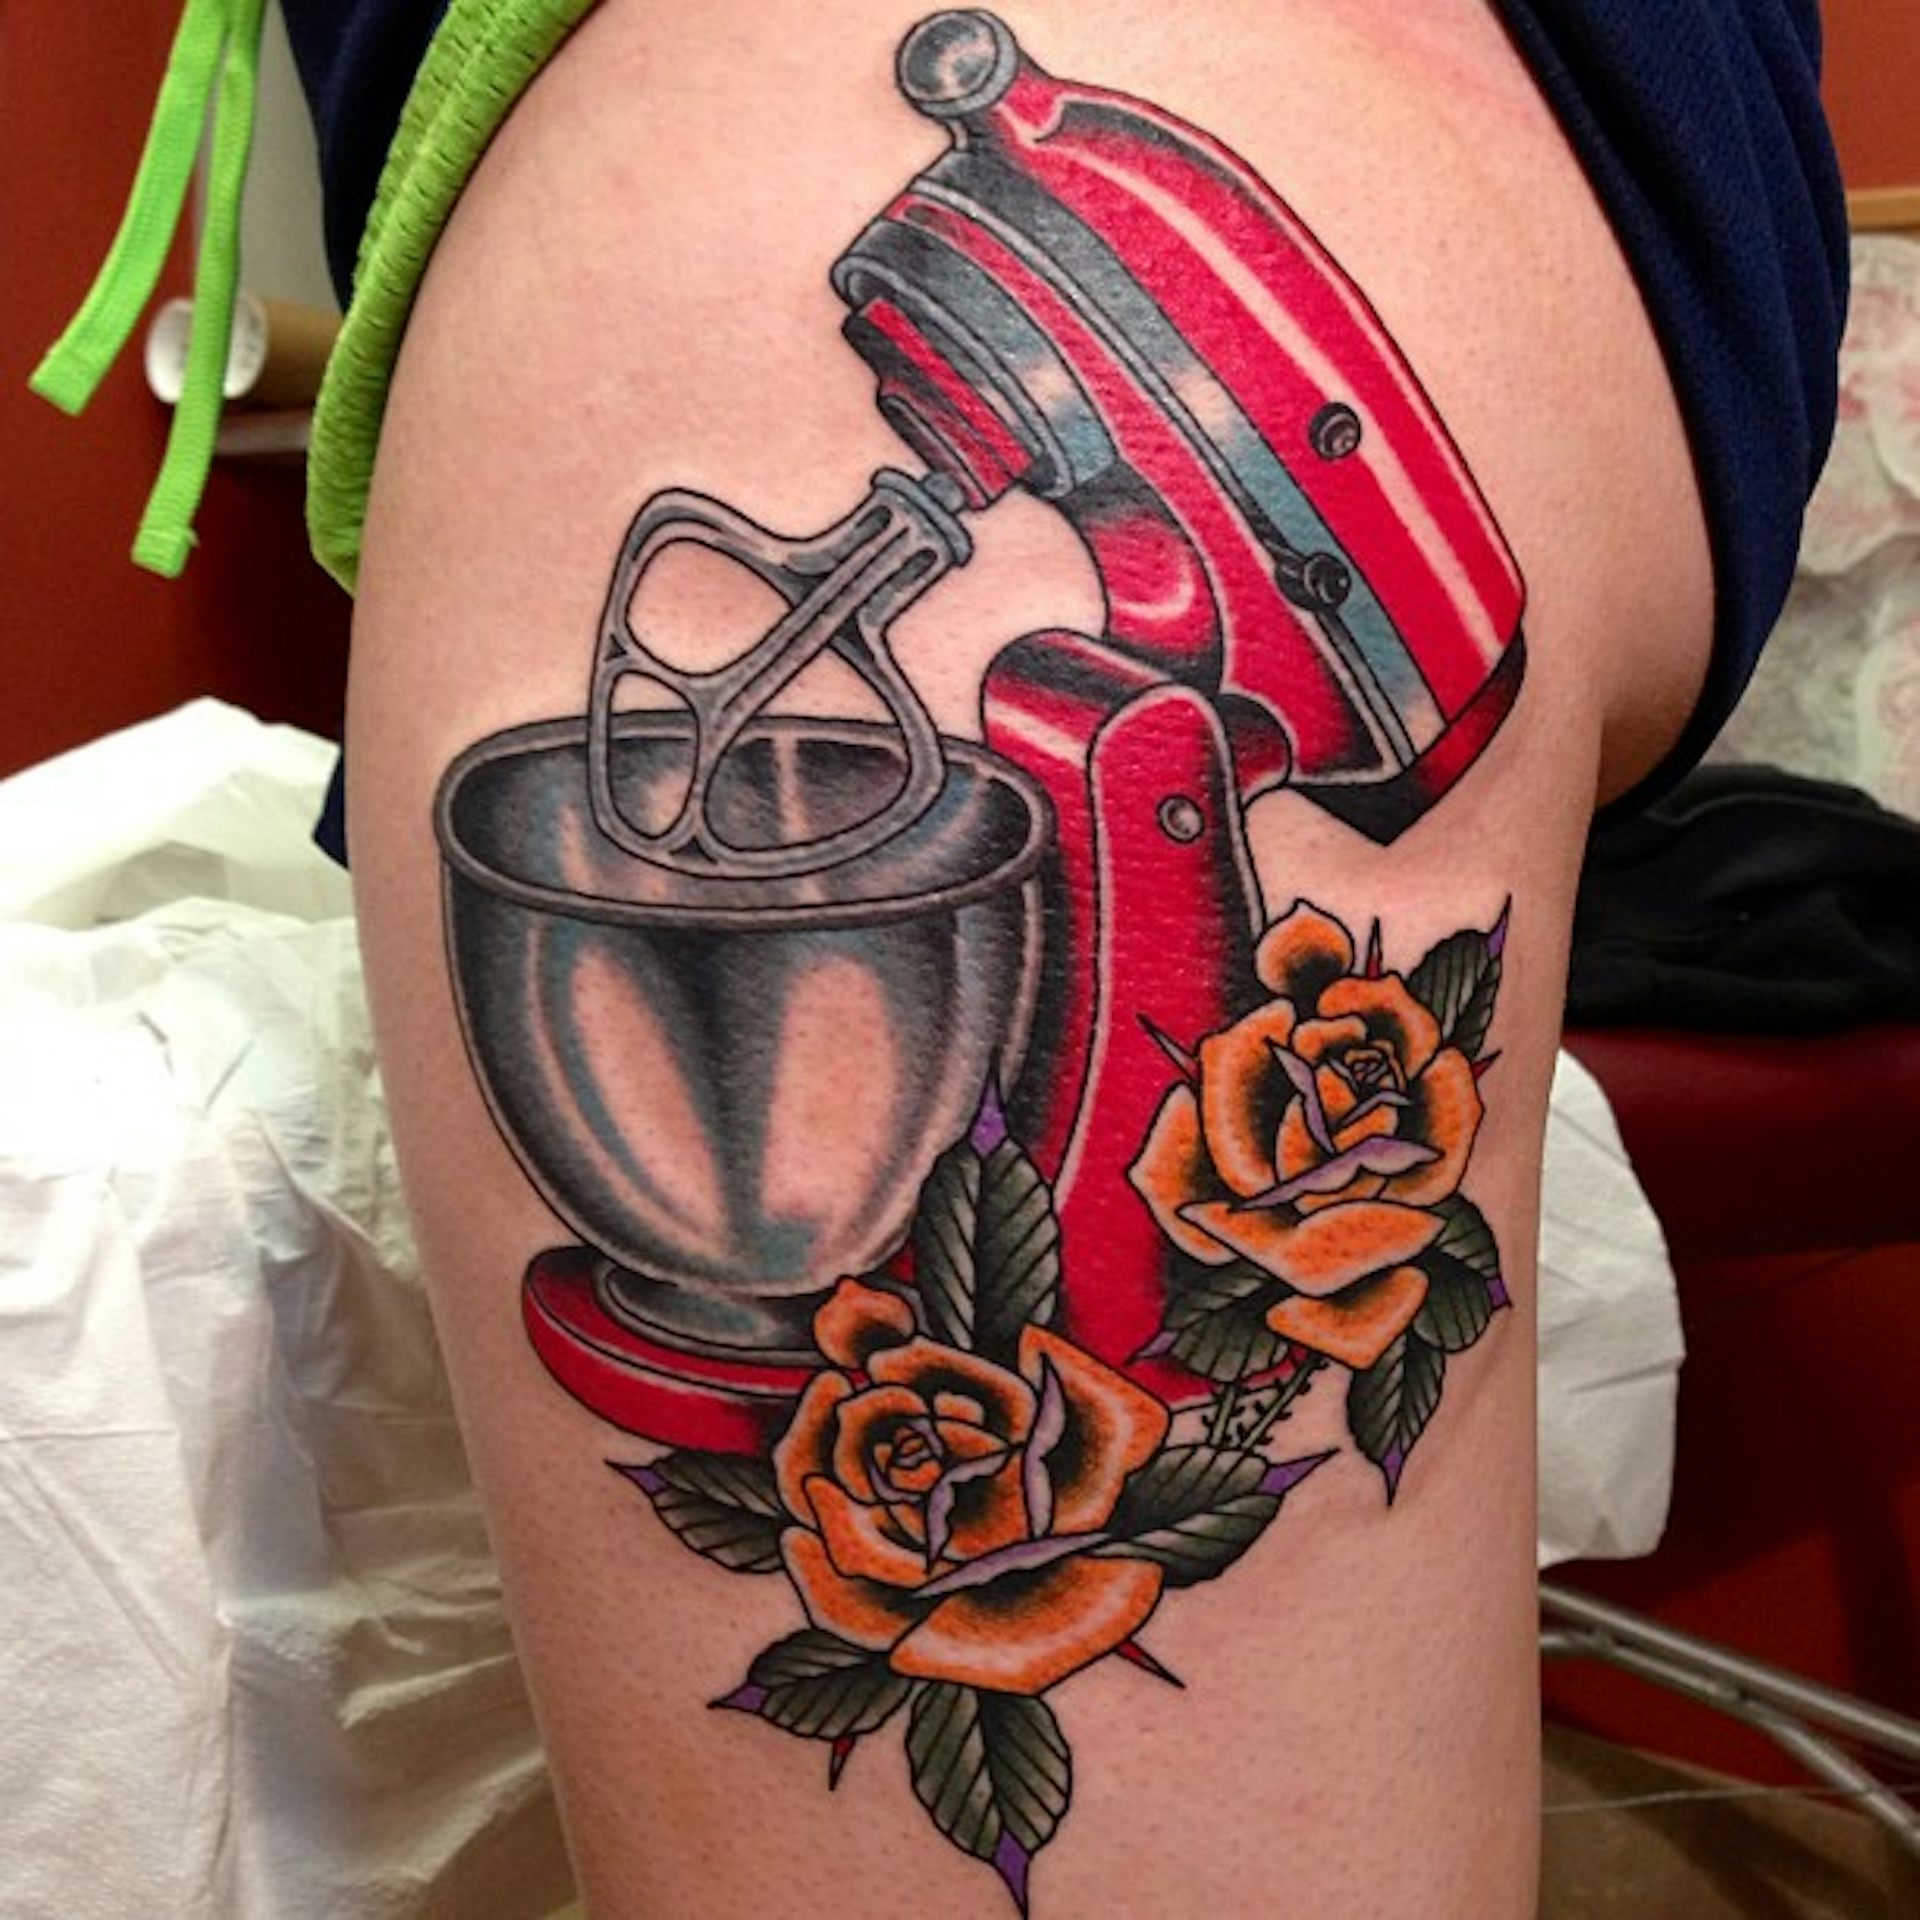 A knife a fork and tattoos North Jersey chefs and their inked bodies